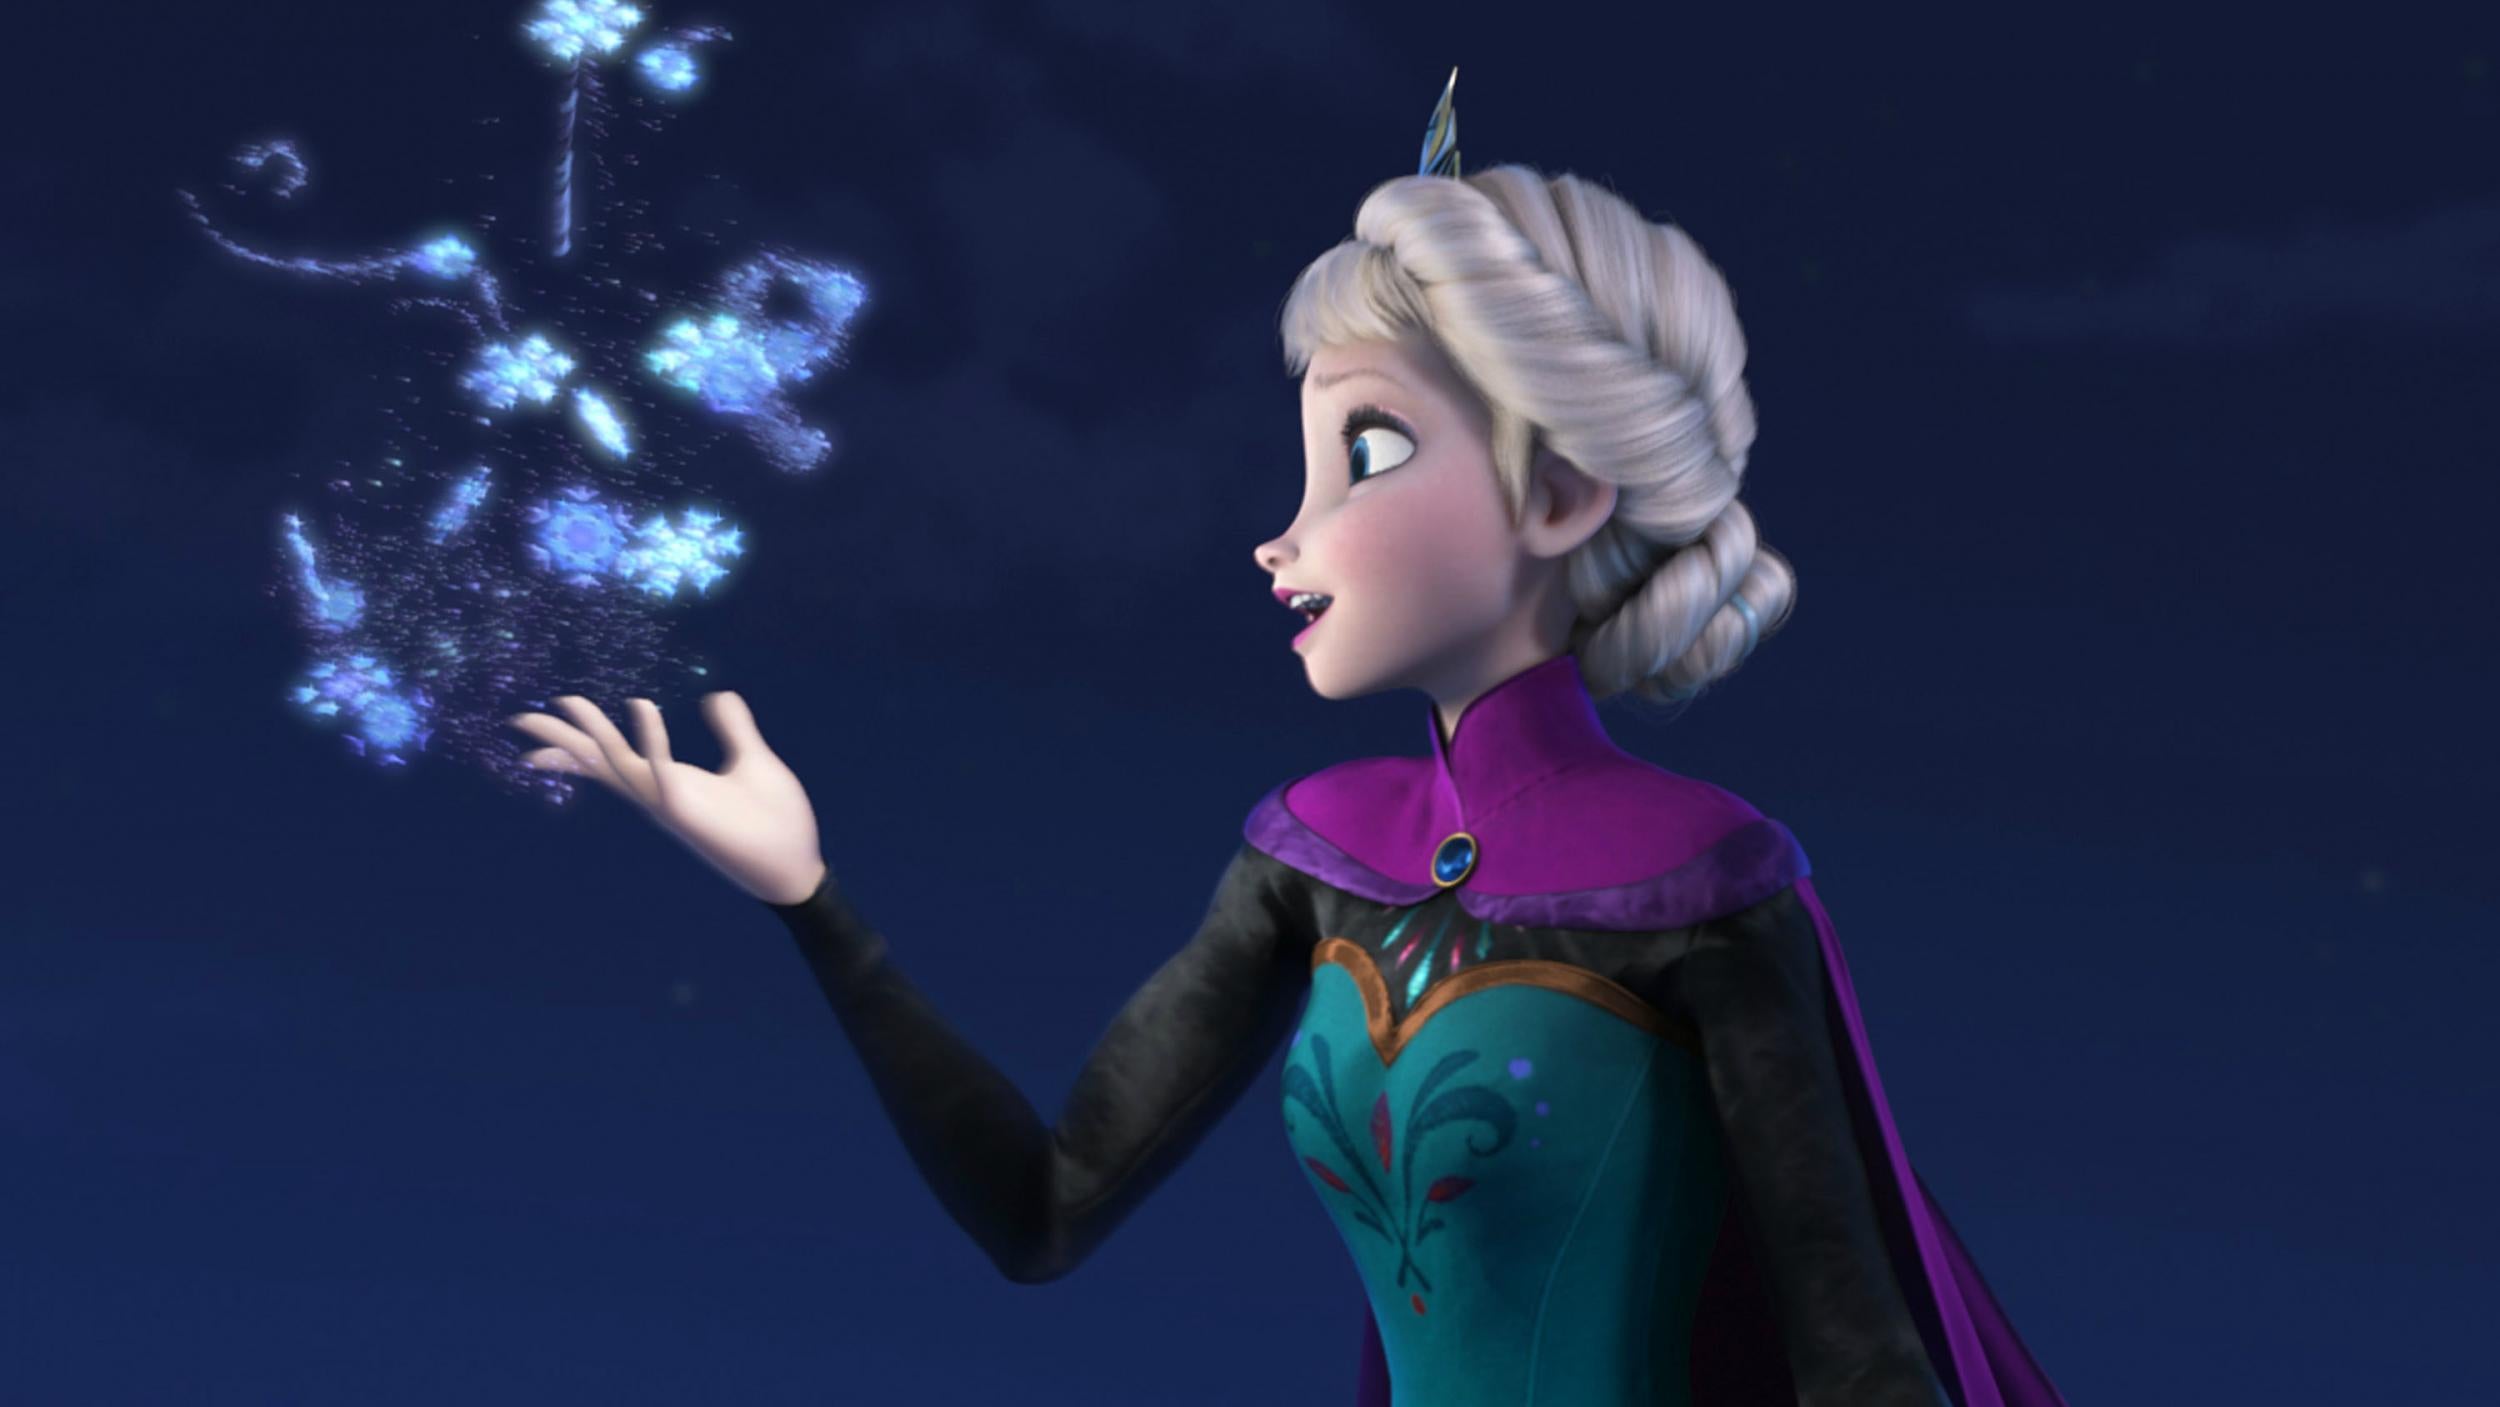 A Twitter campaign – #GiveElsaAGirlfriend – calls for Disney to make one of its princesses a lesbian in the forthcoming sequel to 'Frozen'